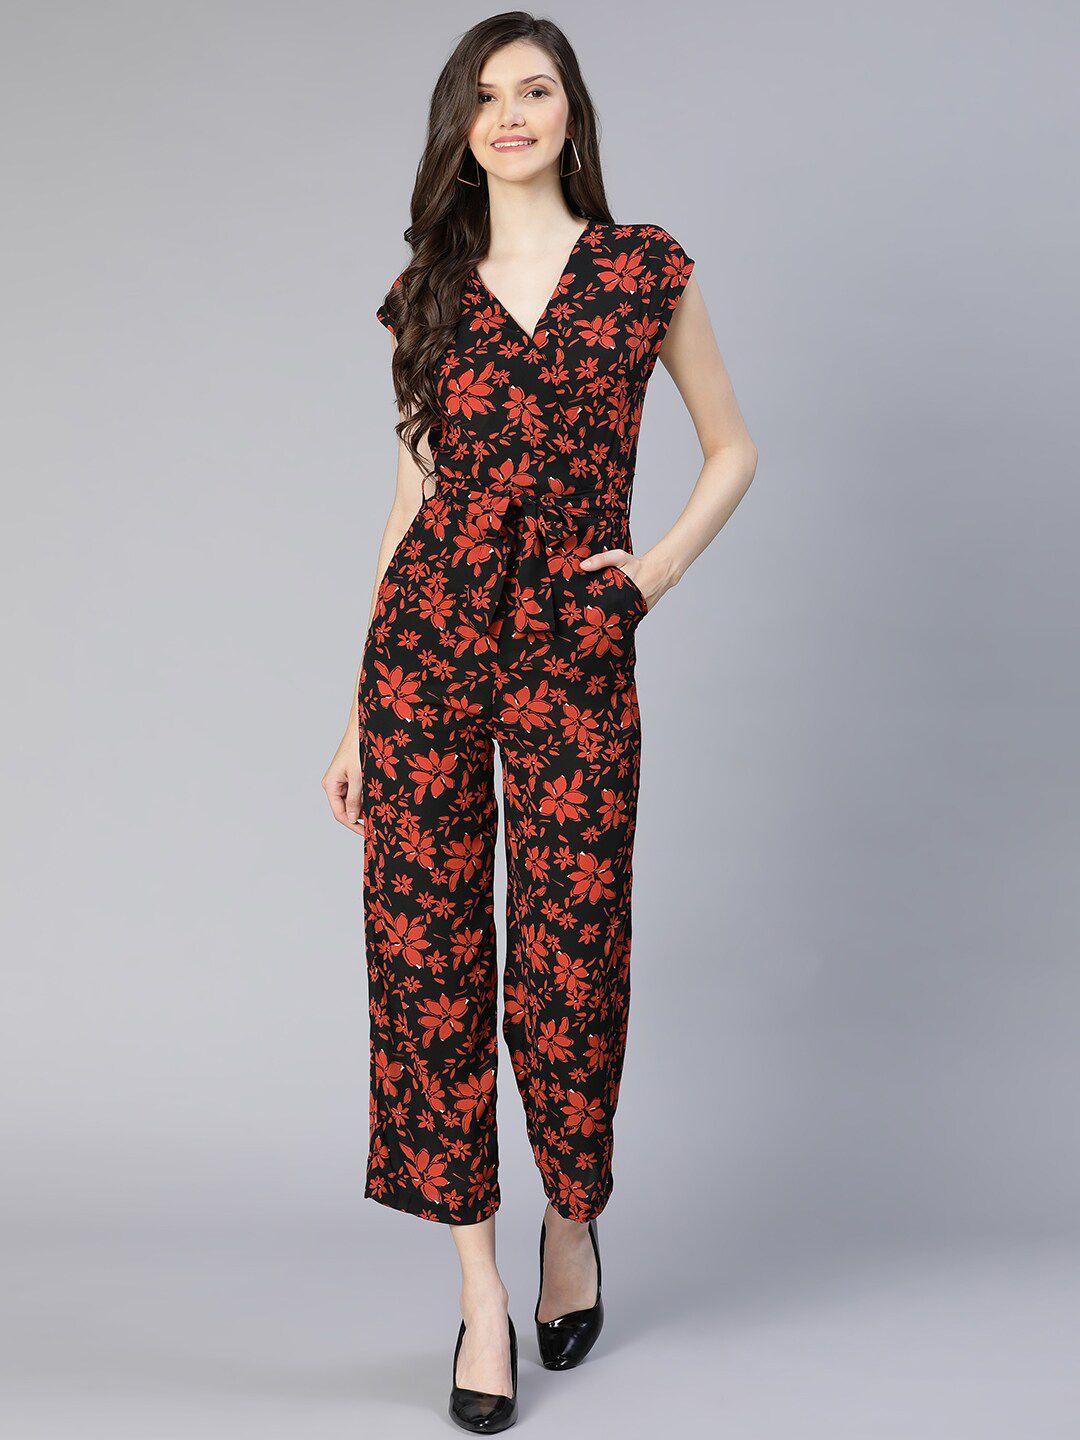 oxolloxo women black & red printed basic jumpsuit